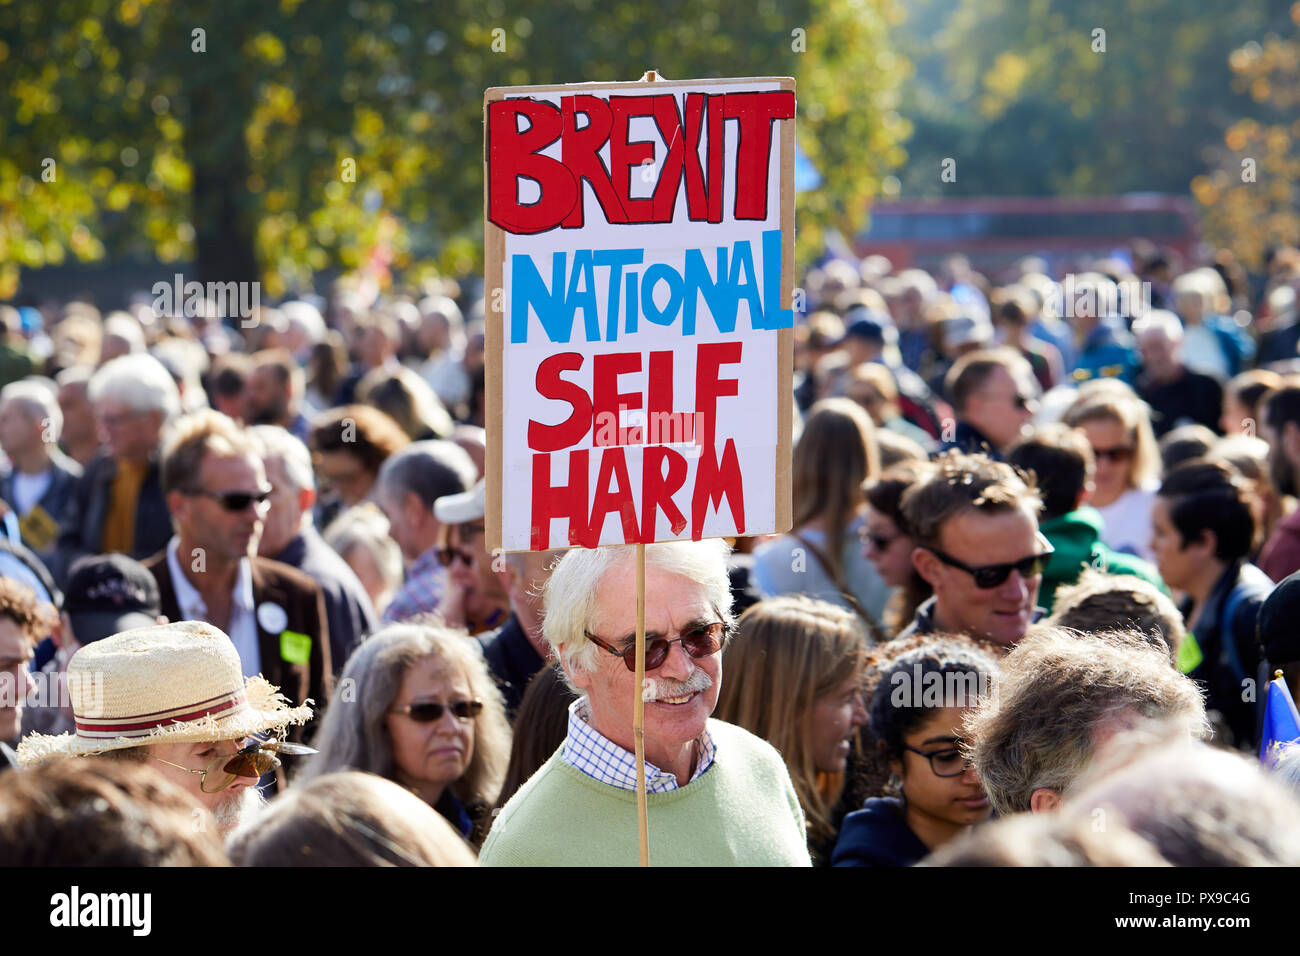 London, UK. 20th Oct, 2018. A placard critical of Brexit held aloft at the People's Vote march. Credit: Kevin J. Frost/Alamy Live News Stock Photo